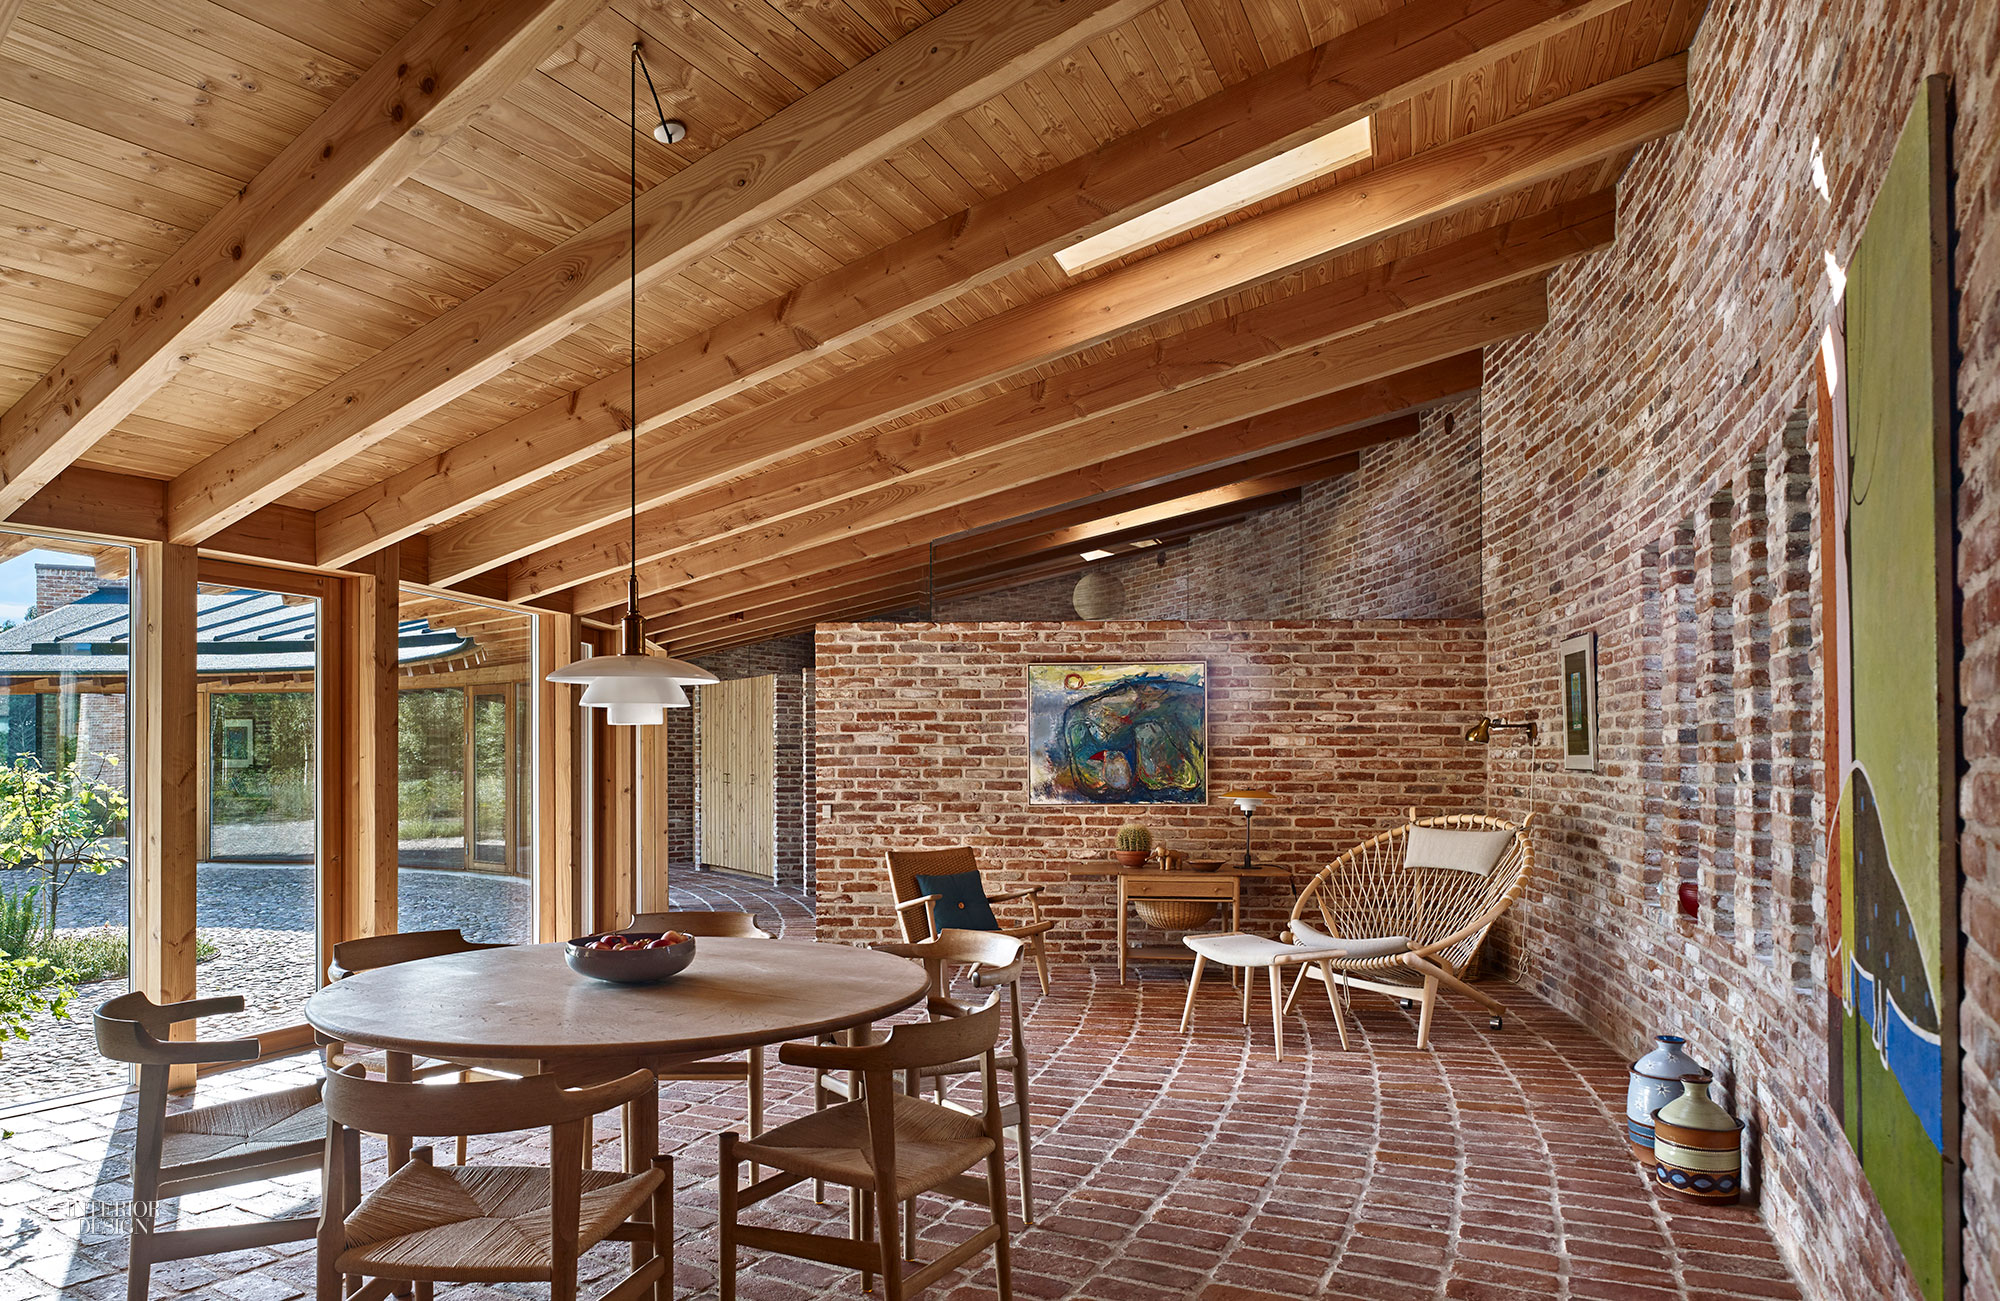 Wooden beams overhead in this airy patio add to the charm